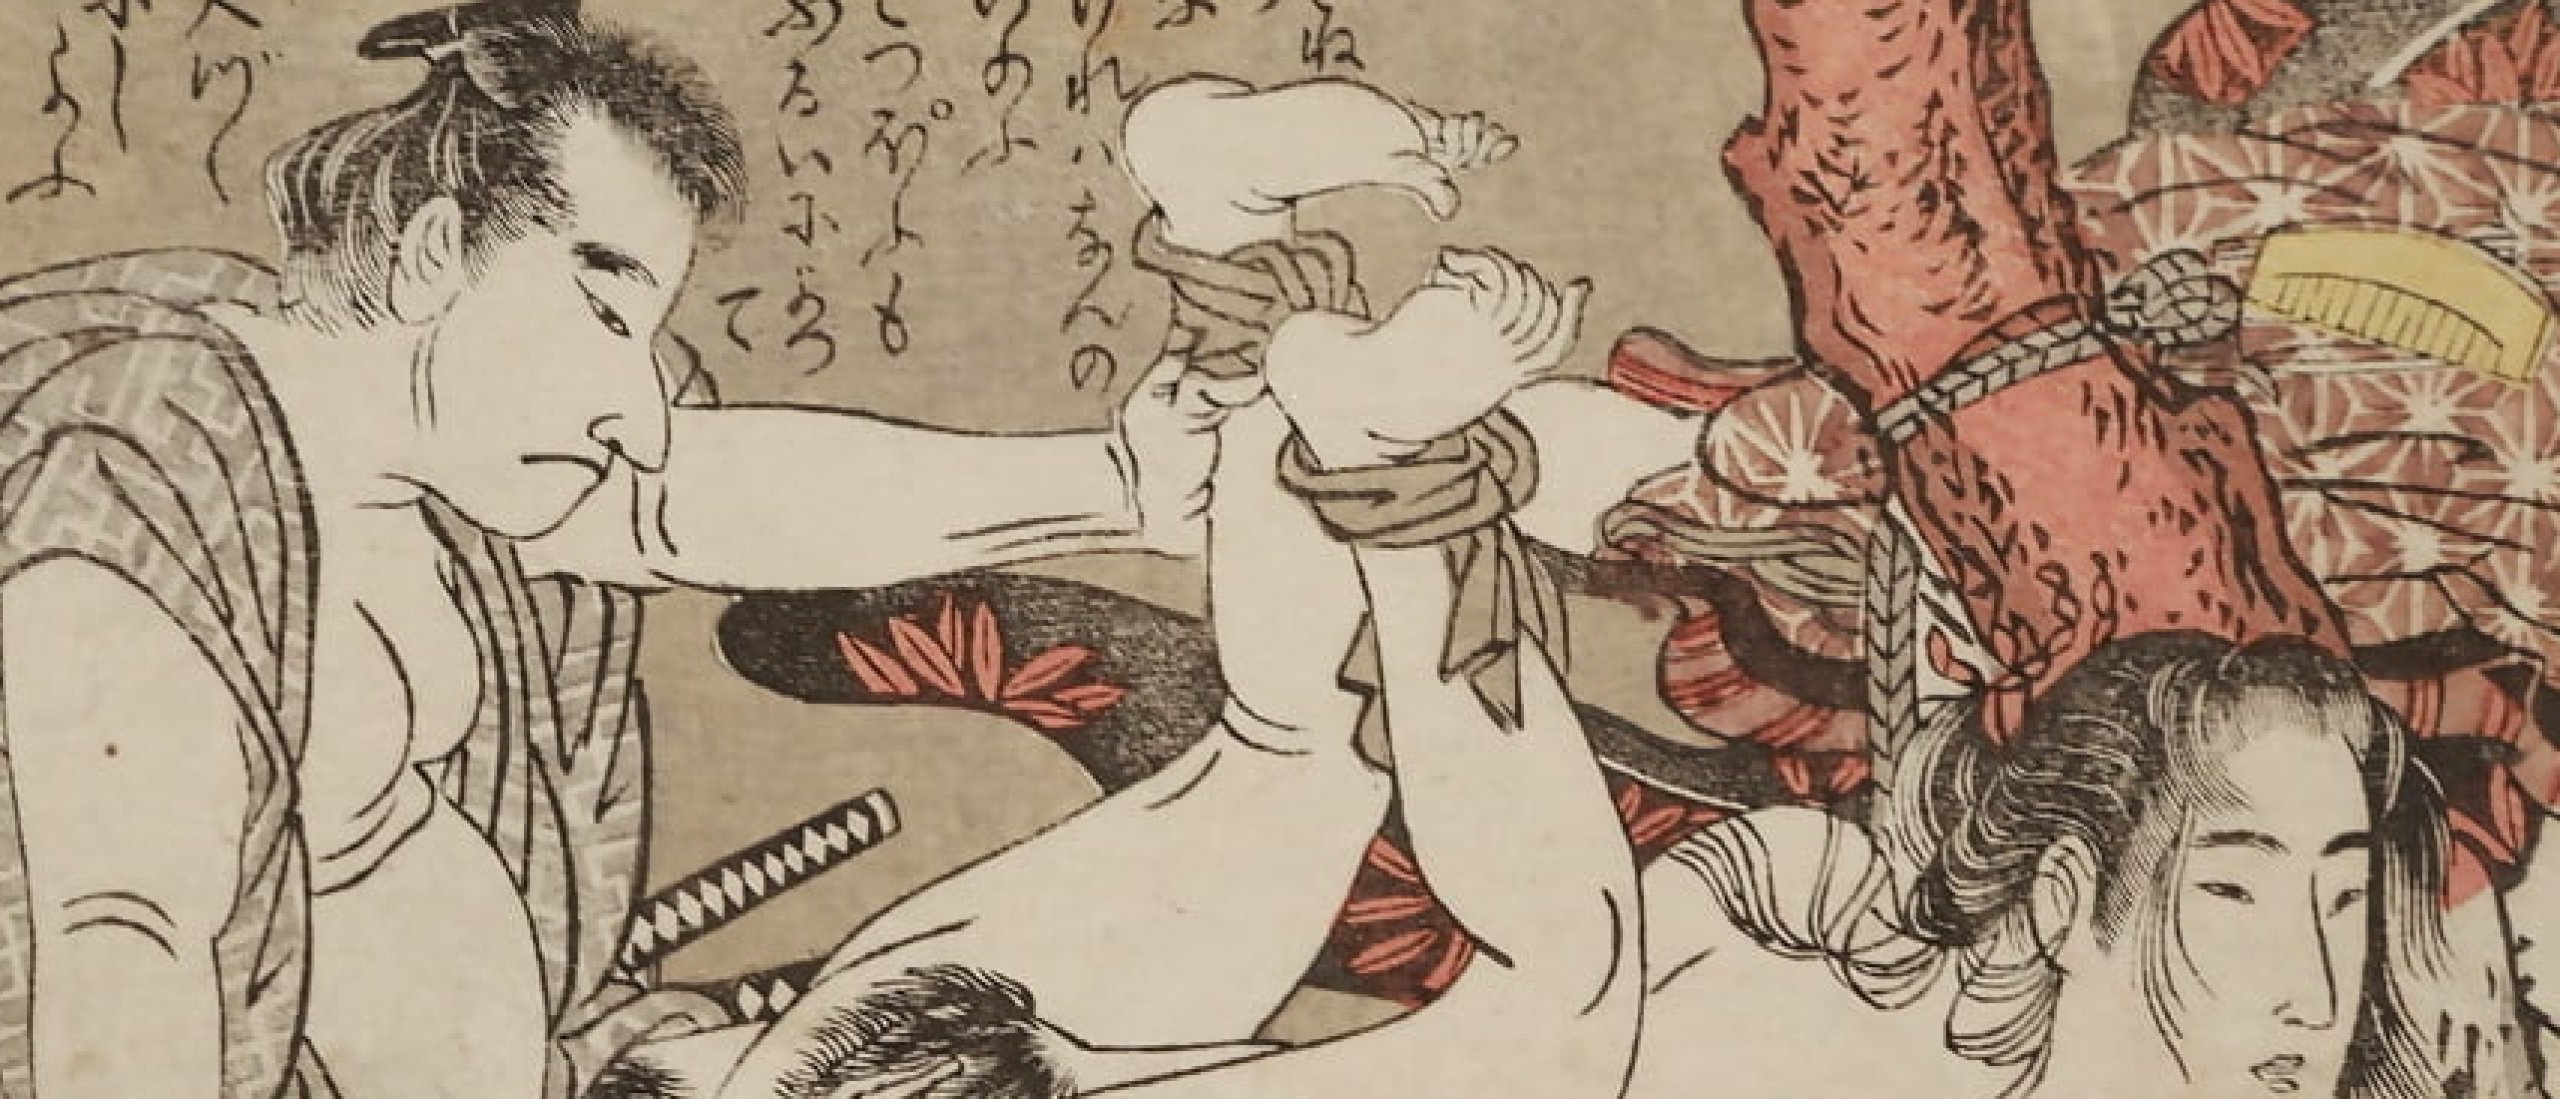 Disquieting Scenes of Forced Lovemaking In Shunga Art